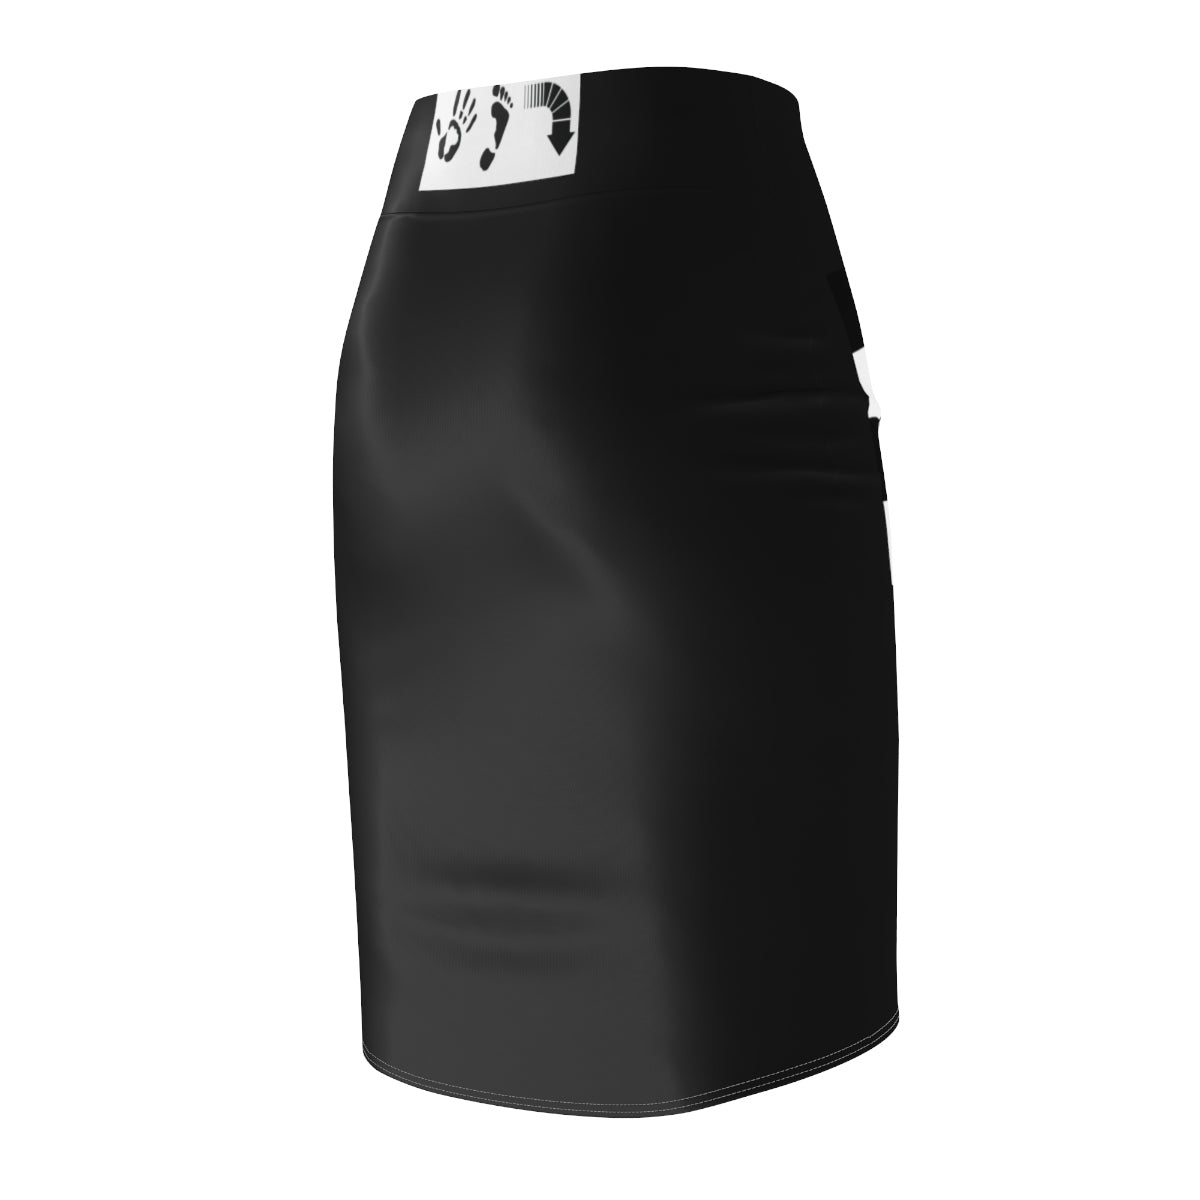 Five Toes Down Checkerboard Blk Women's Pencil Skirt